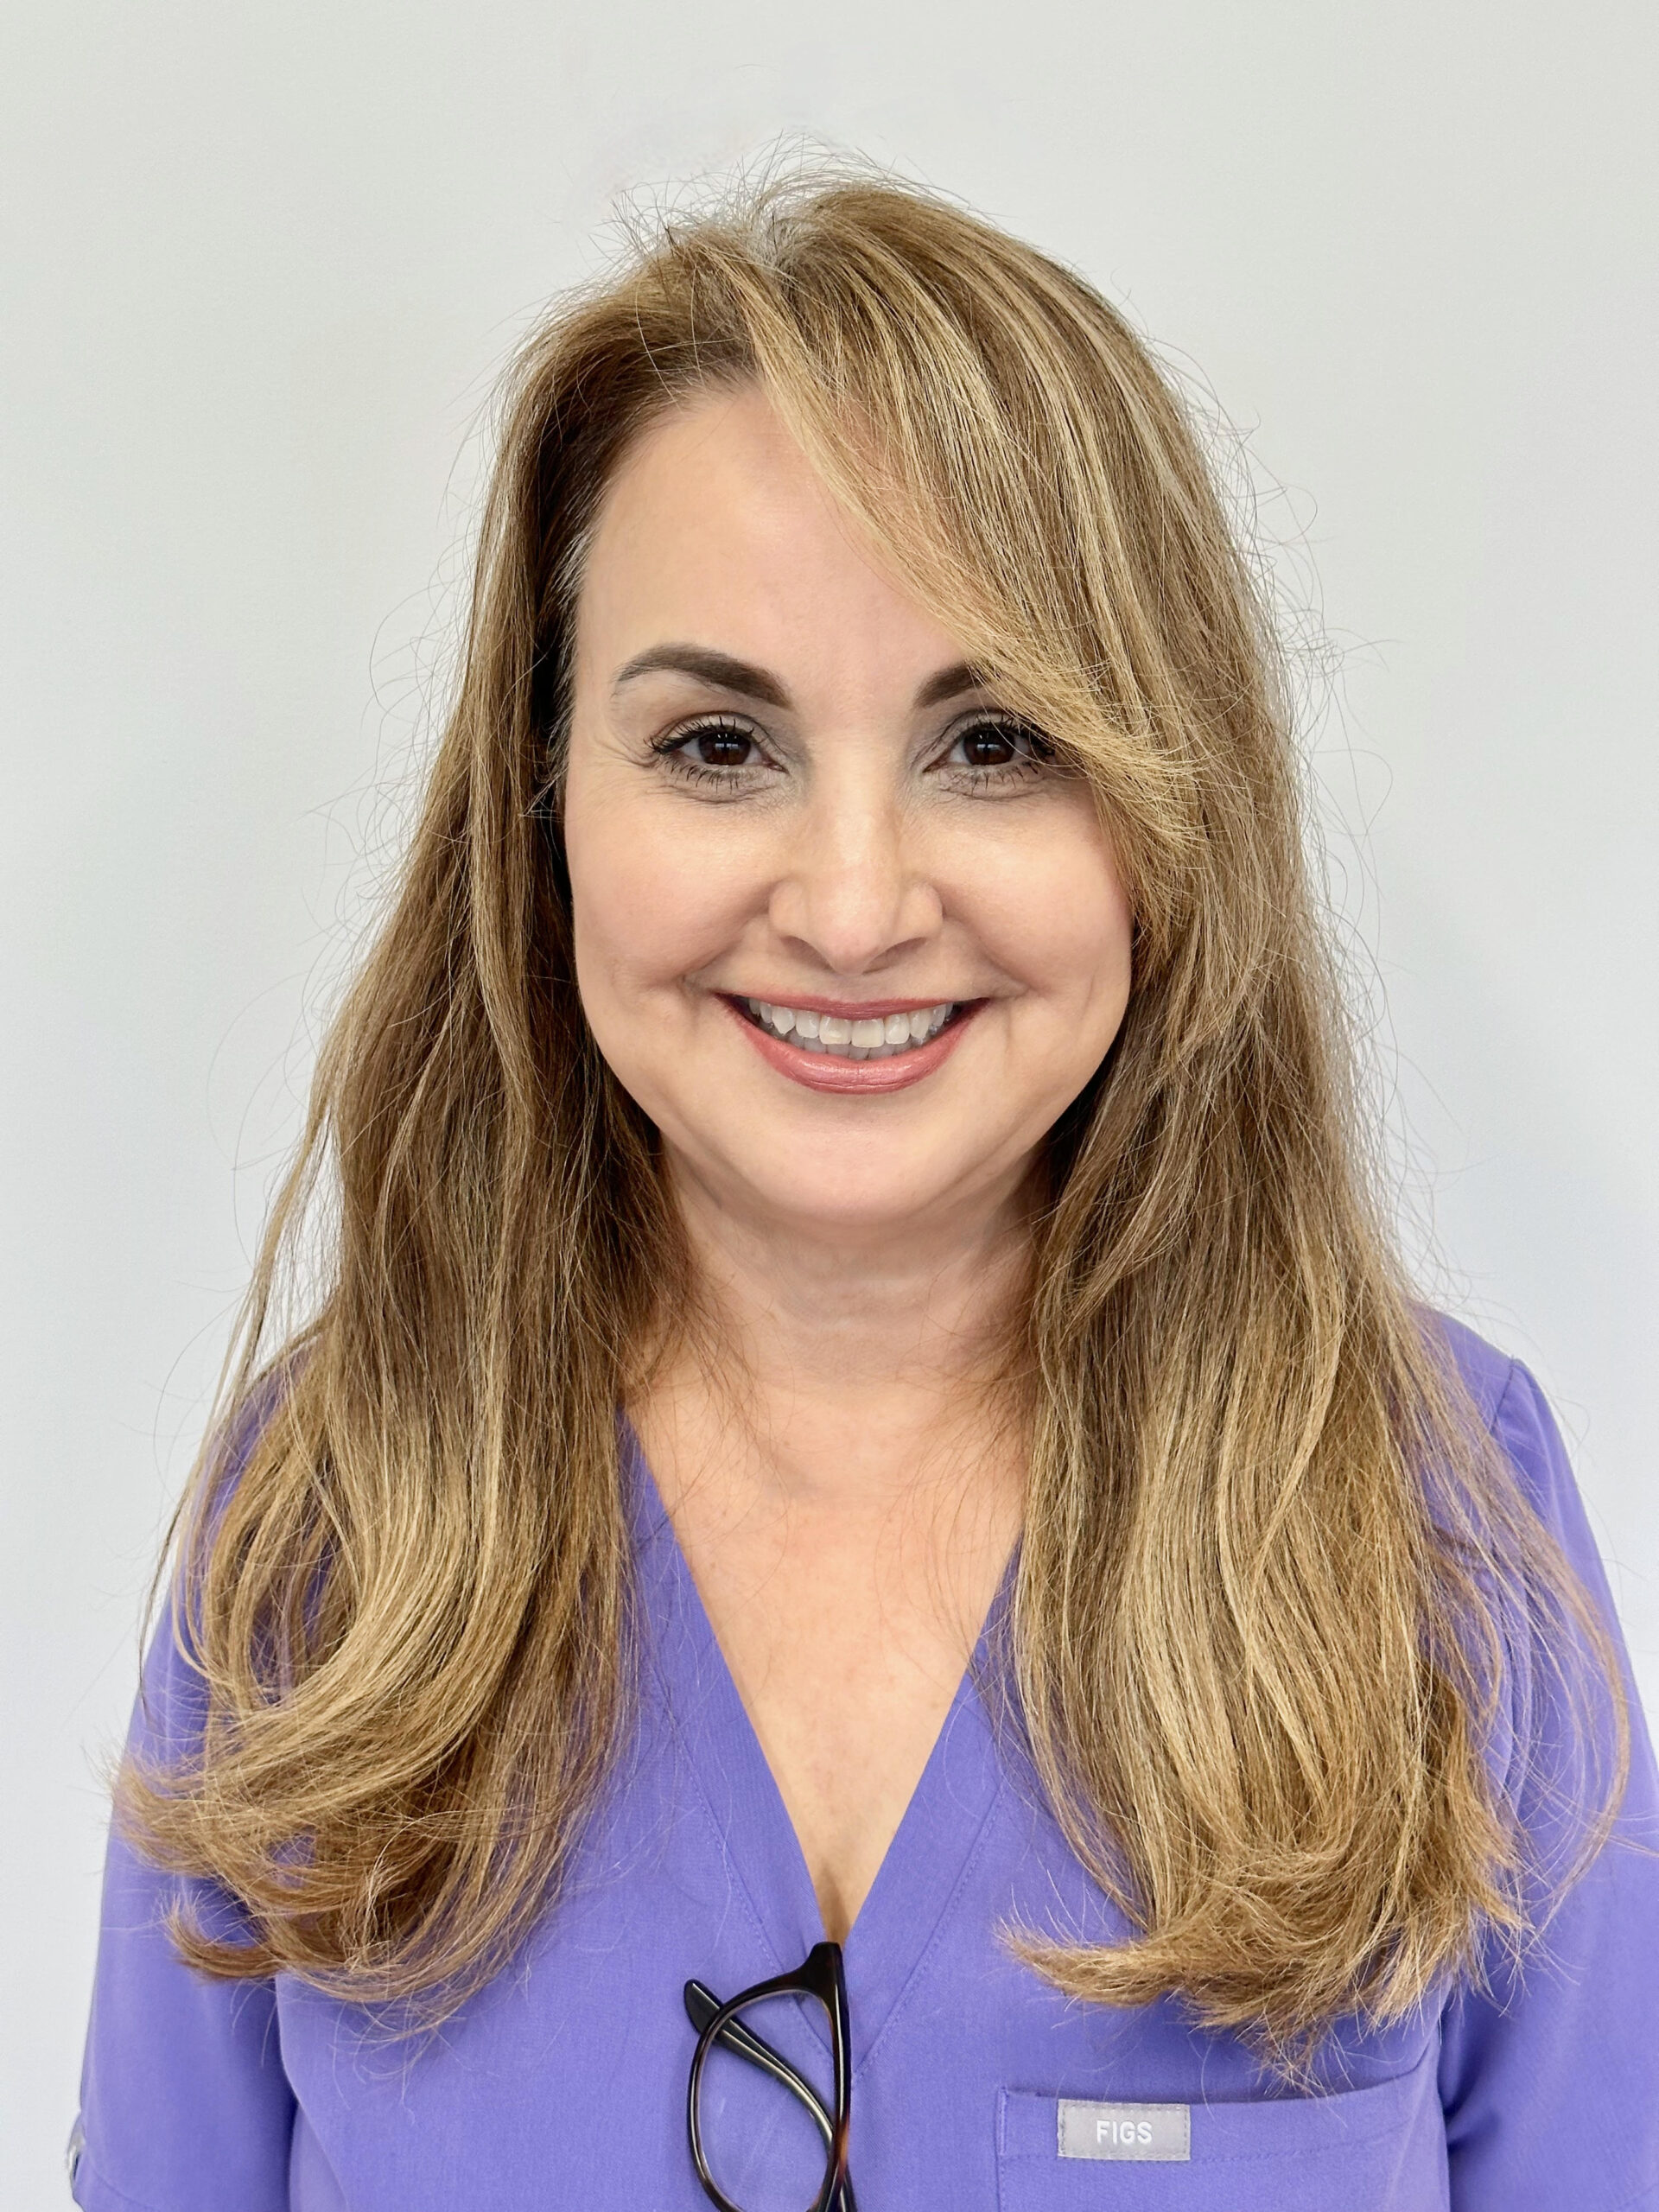 Whitni Woodard, Licensed Aesthetician at Metropolis Dermatology in Brentwood and Downtown LA